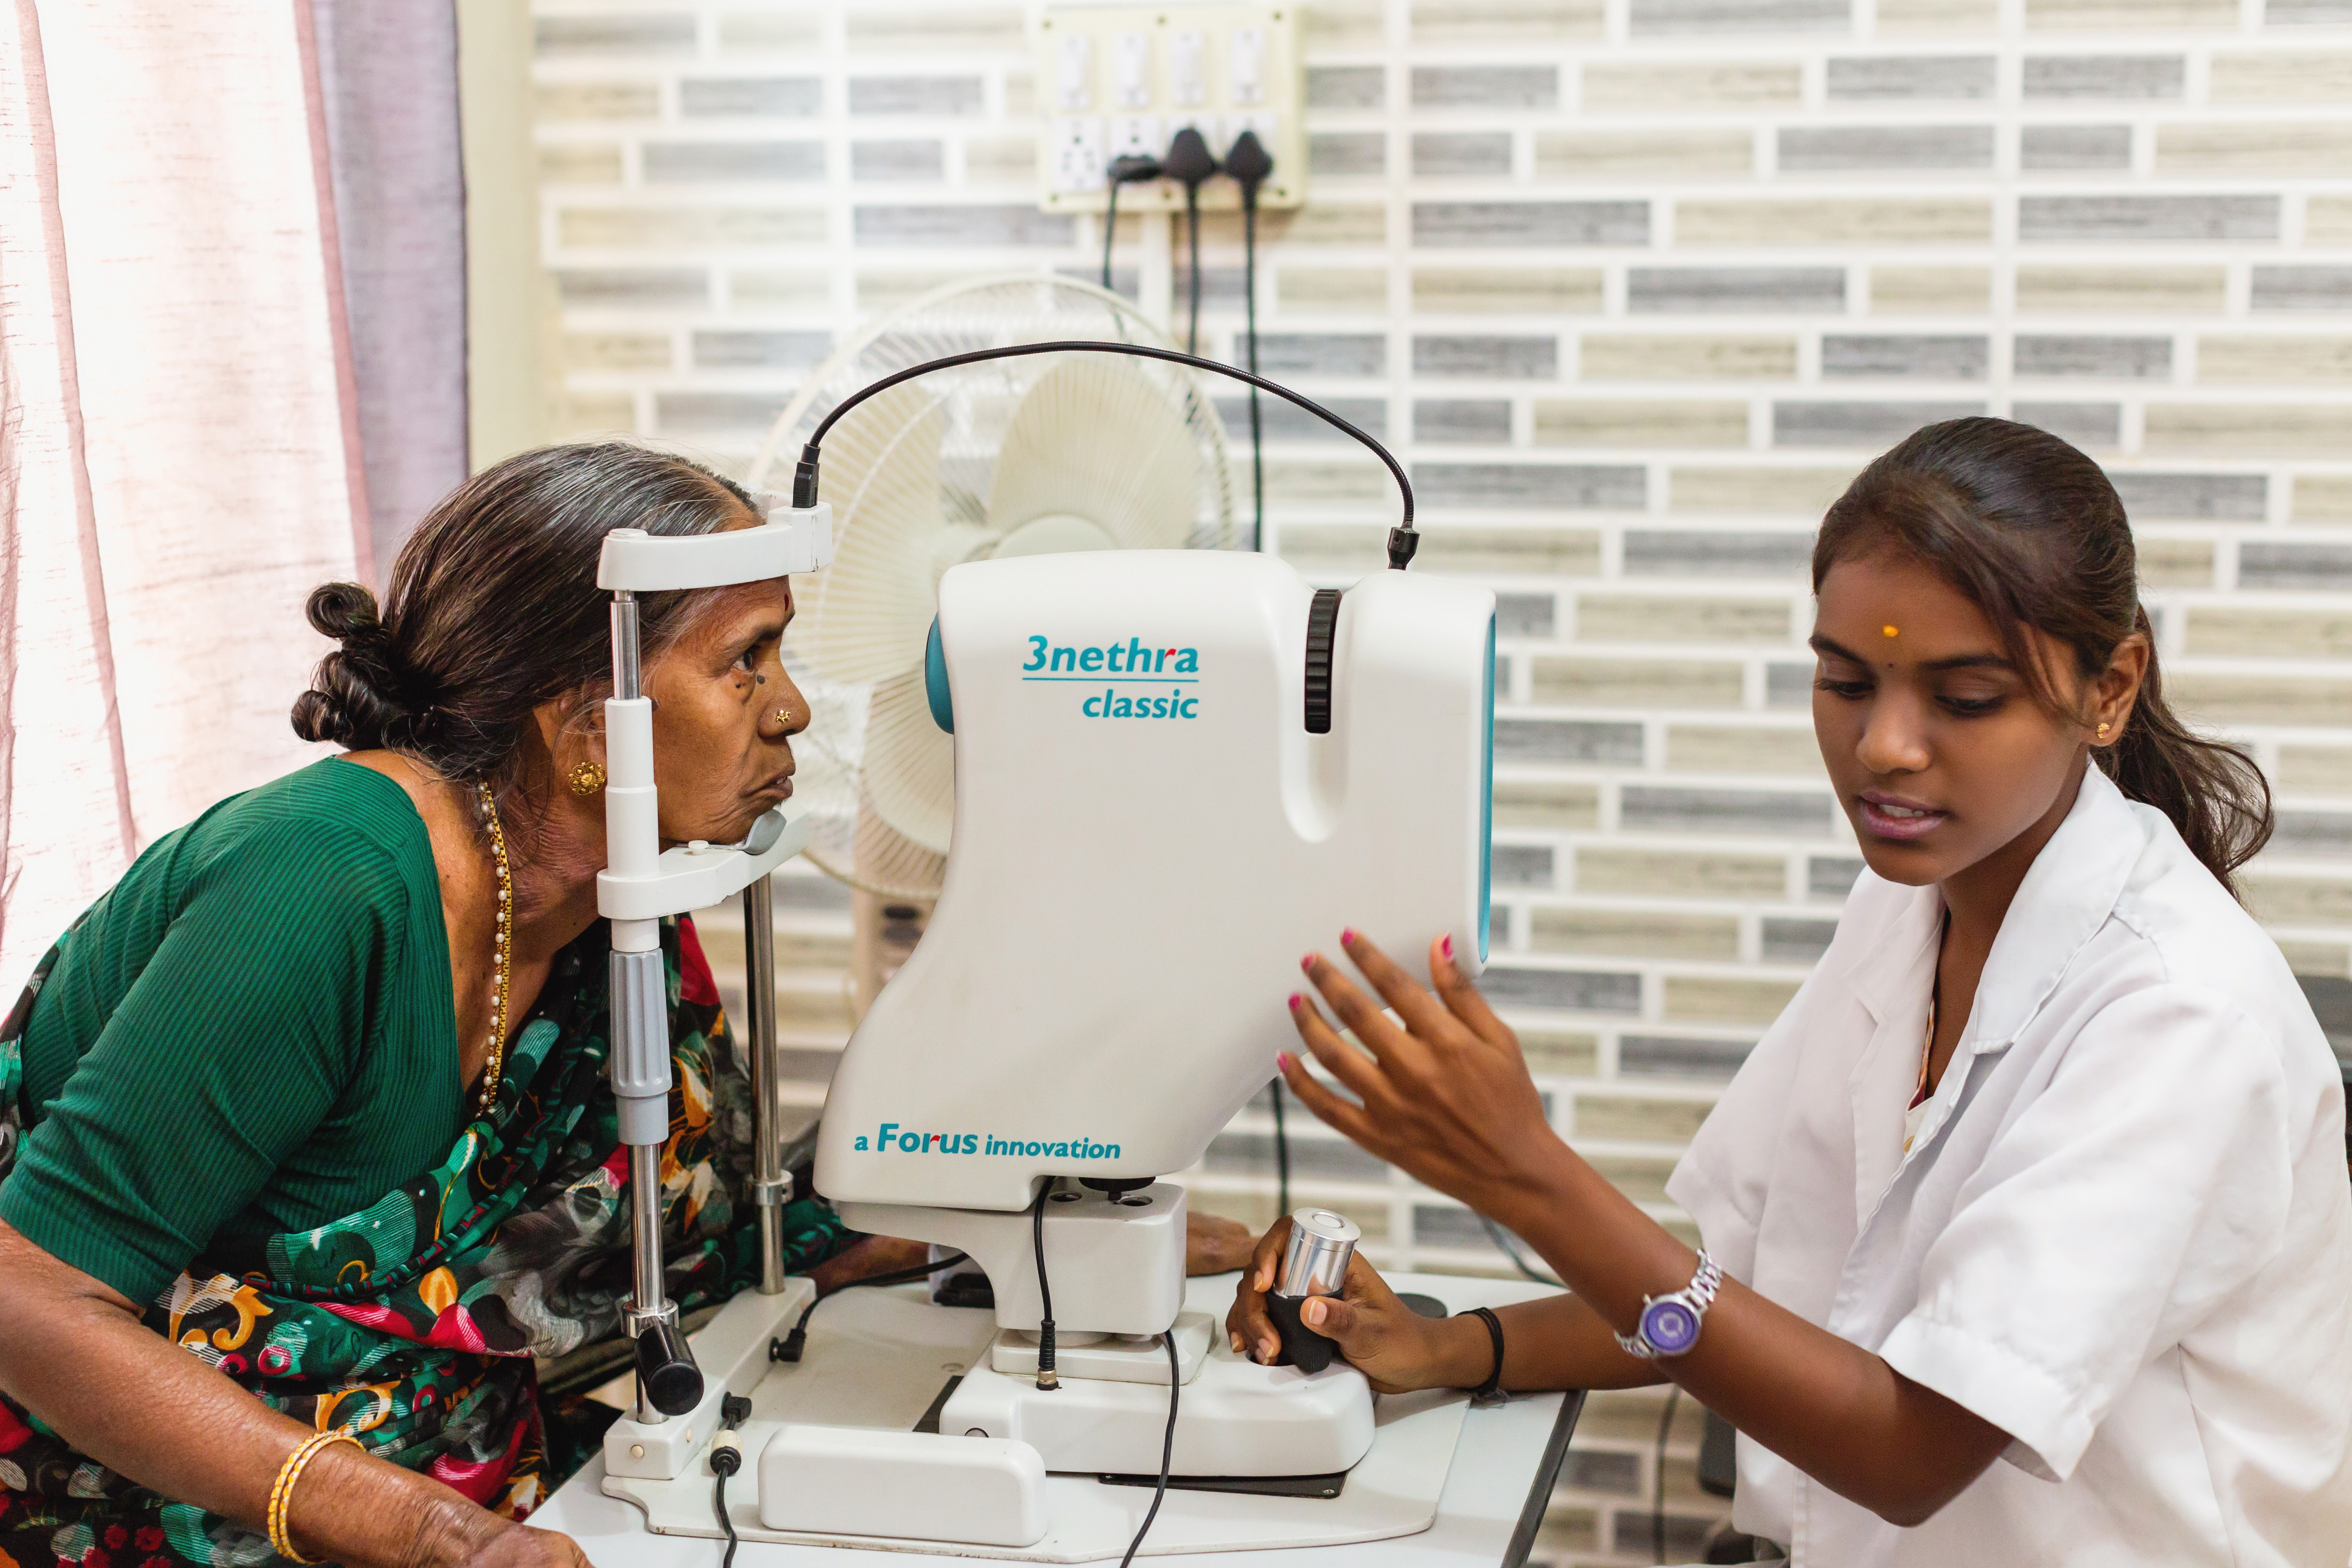 Forus Health created the 3nethra, a rugged and portable device that brings eye exams to communities in hard-to-reach areas of the world. Images of the eye are captured by the device and sent to an ophthalmologist for diagnosis. Forus has reached two million people in 16 countries in an effort to eradicate preventable blindness around the world. 

Forus is being honored at The Tech Museum of Innovation on Saturday, Nov. 4 along with four other organizations using technology to address problems in global health.